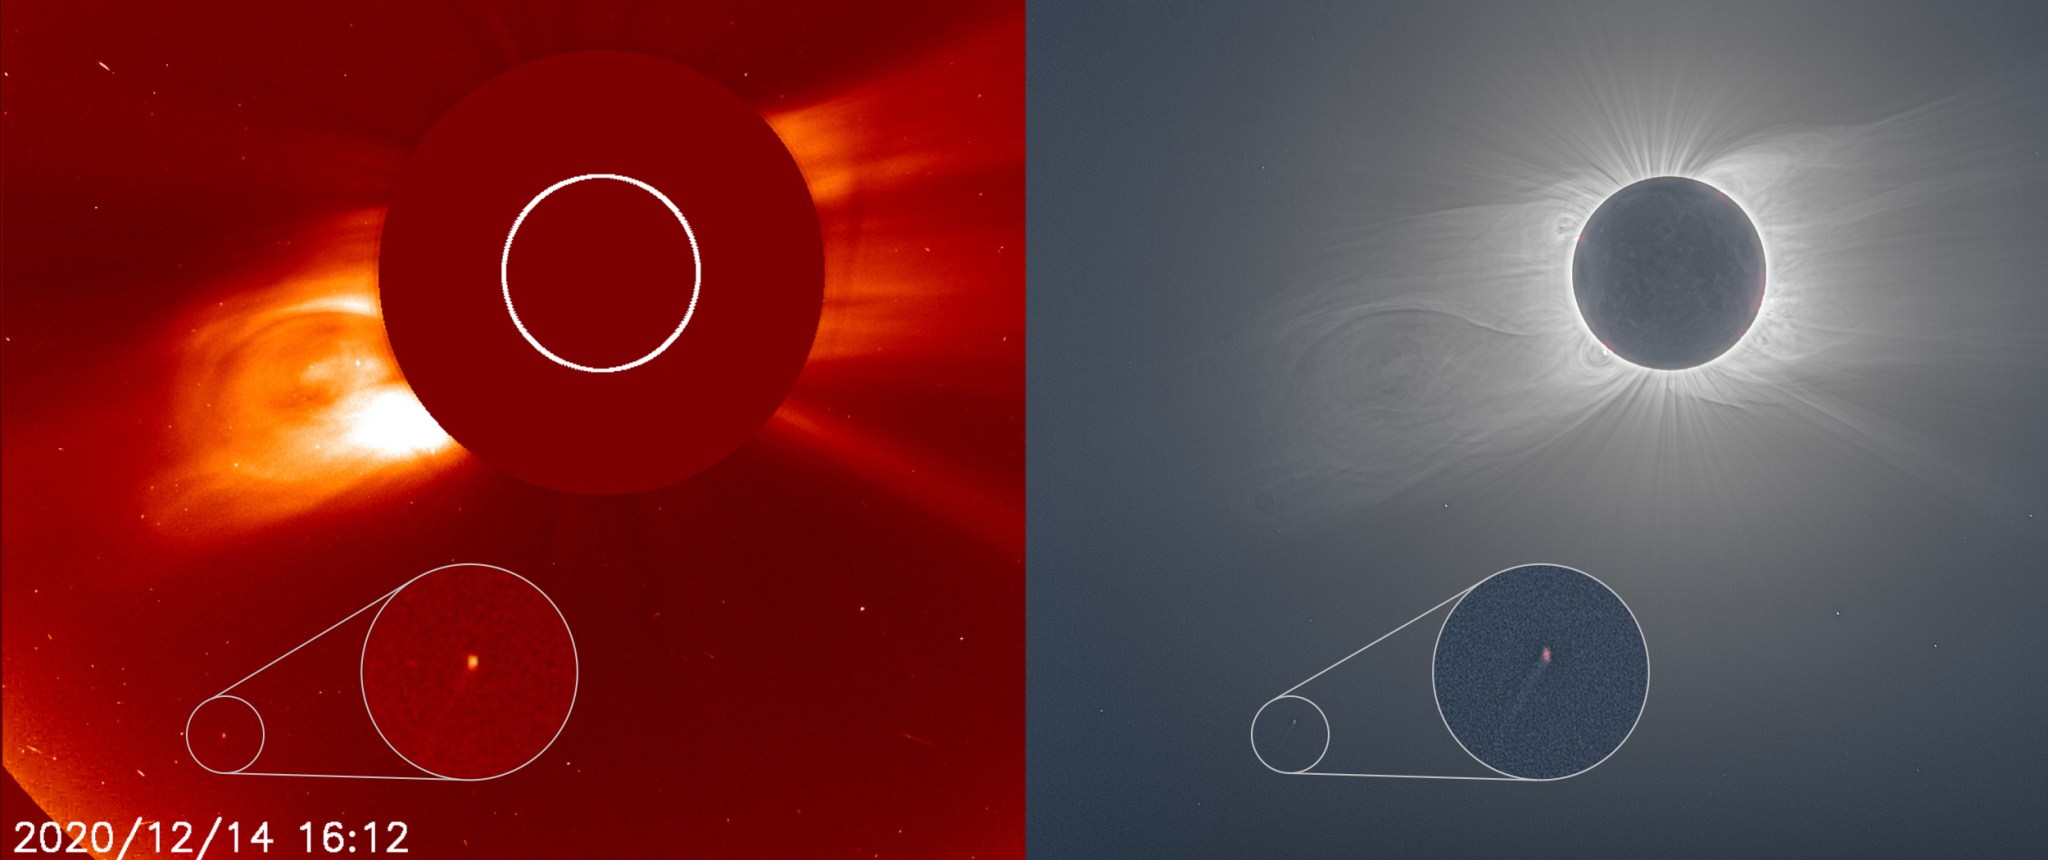 (Left) A satellite image shows a bright speck near the Sun. (Right) A photo of the total eclipse shows the speck from Earth.